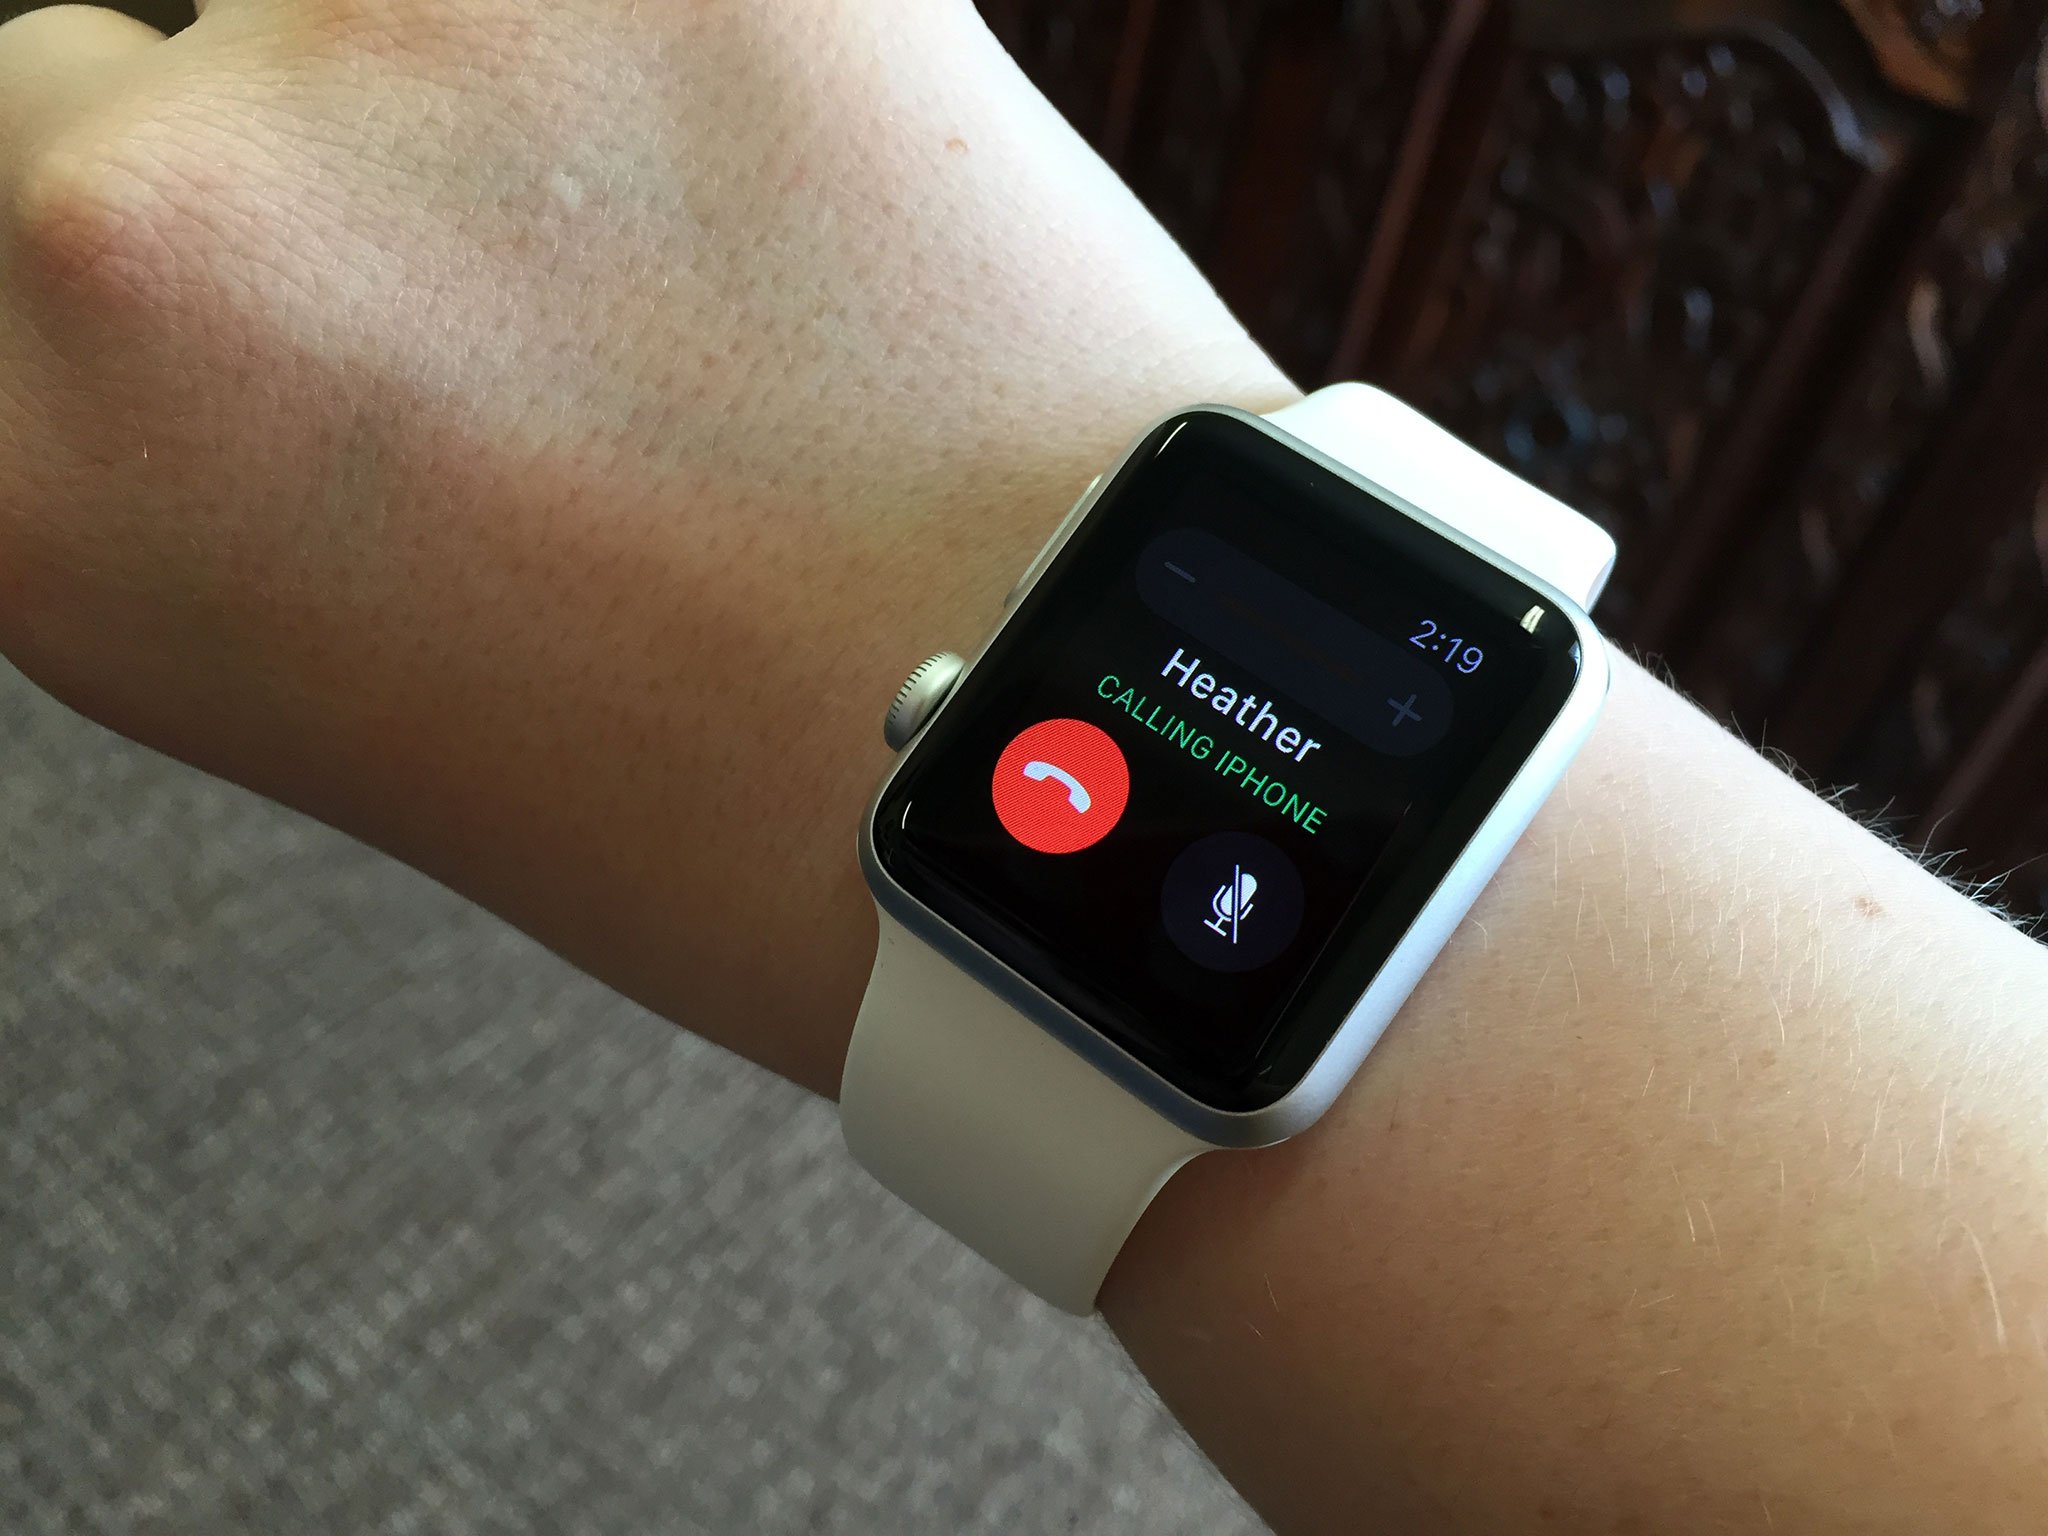 How to make a call with Apple Watch